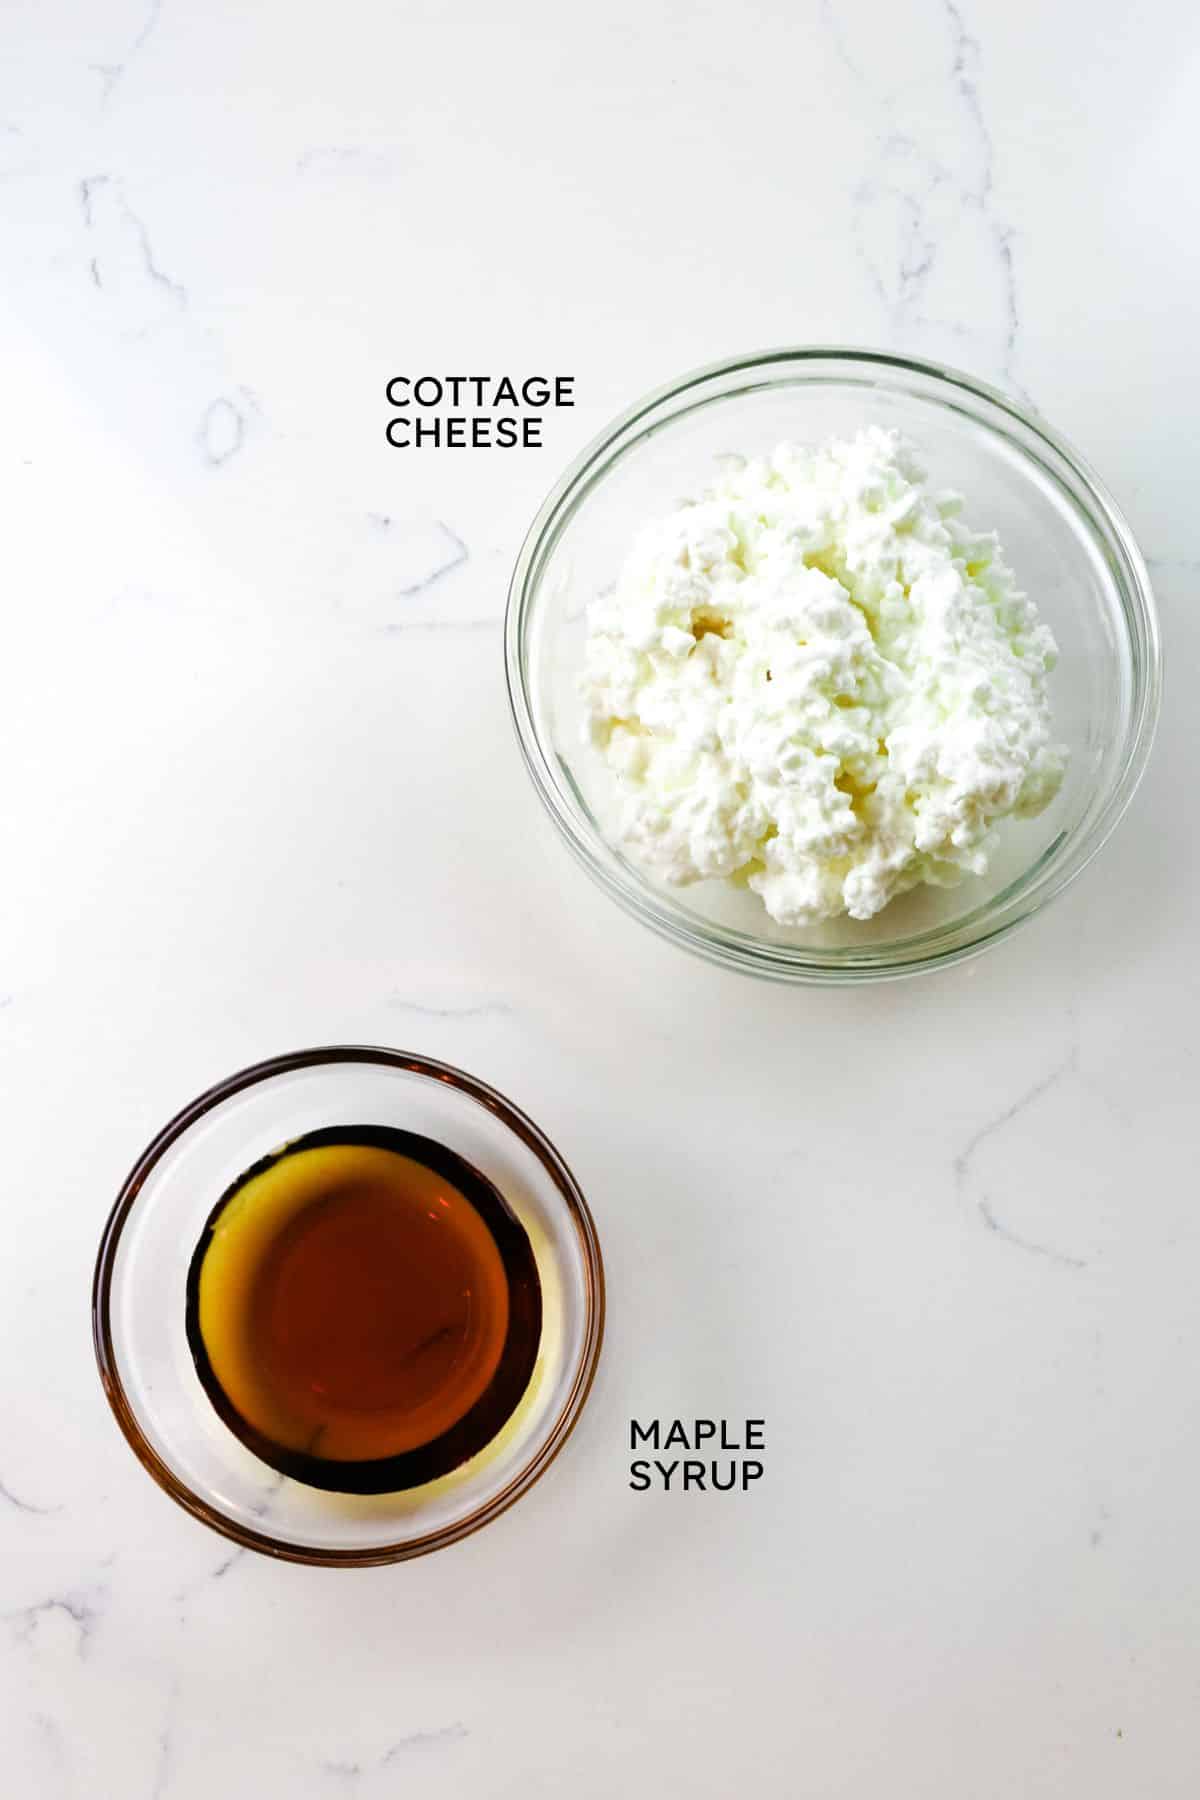 labeled ingredients for cottage cheese and maple syrup.